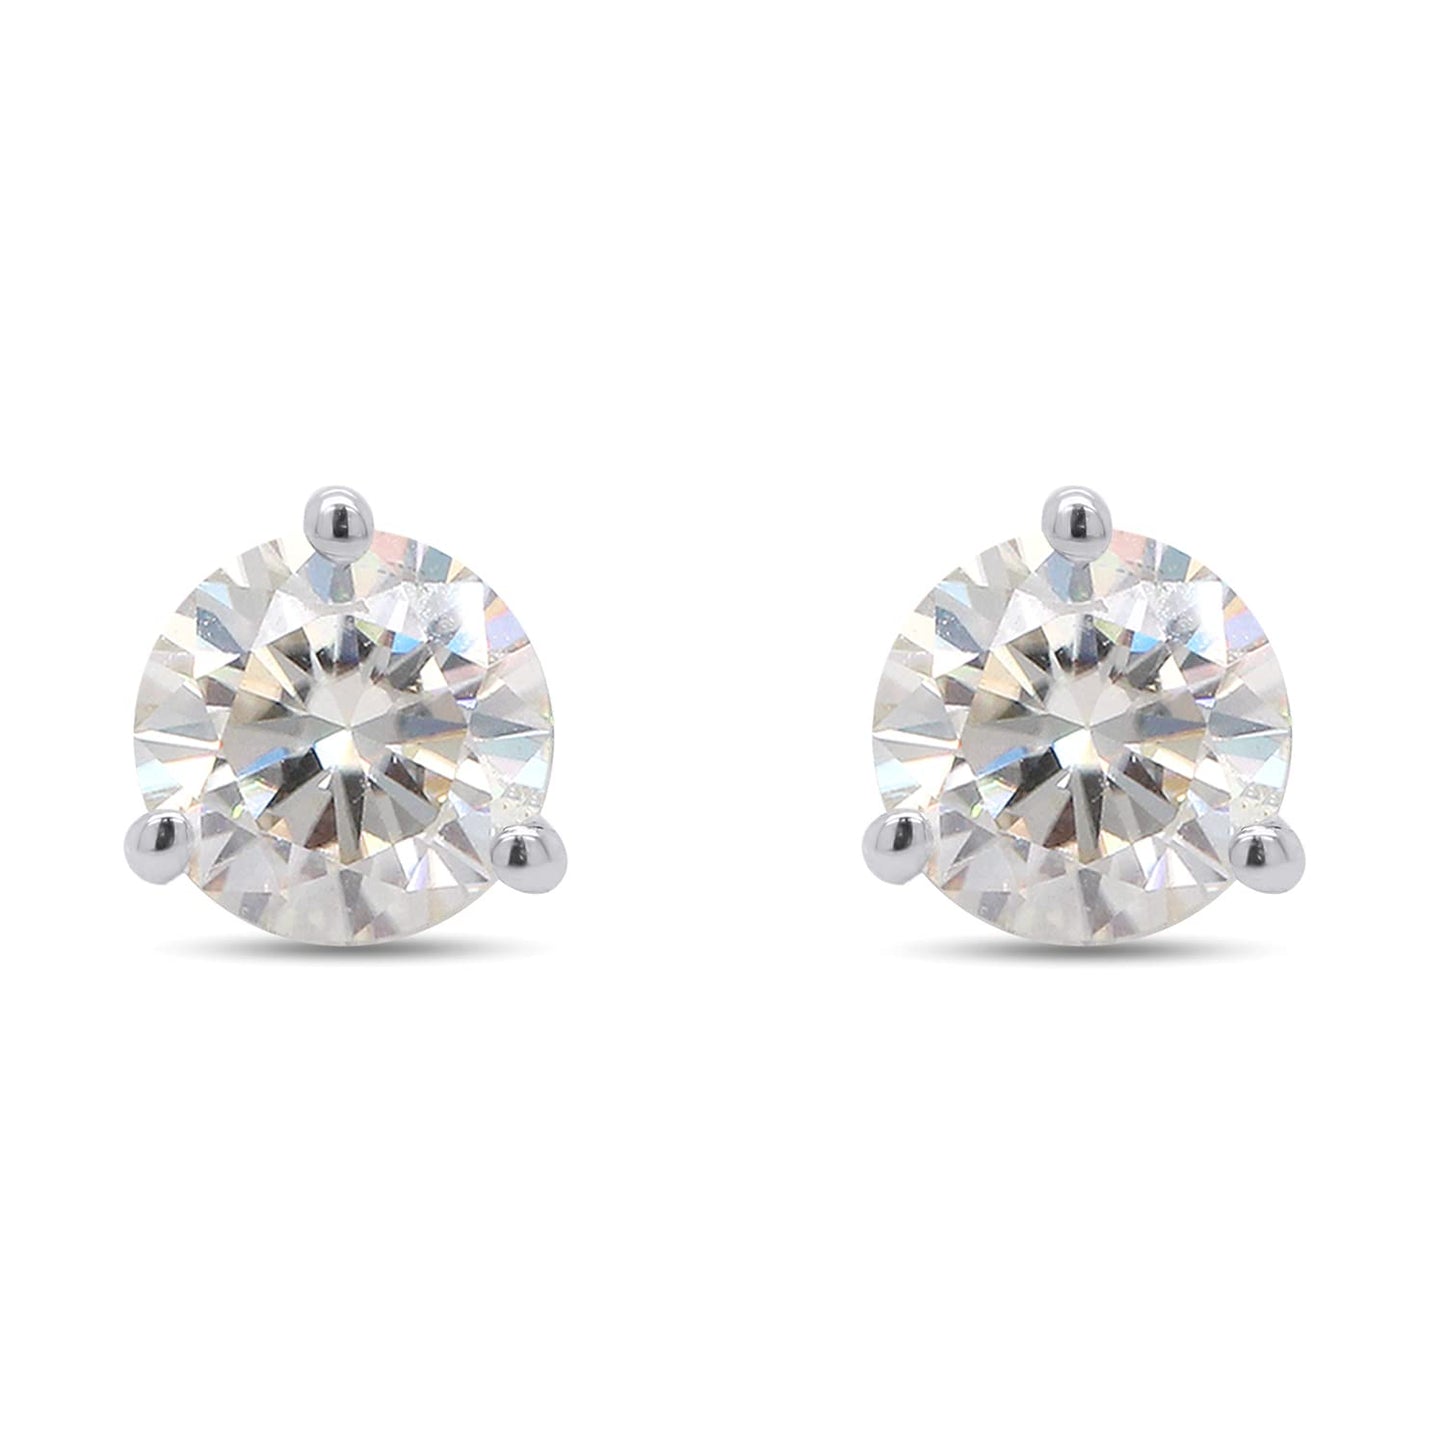 6.5MM Round Cut Lab Created Moissanite Diamond Solitaire Stud Earrings In 10K Or 14K Solid Gold (1.80 Cttw)